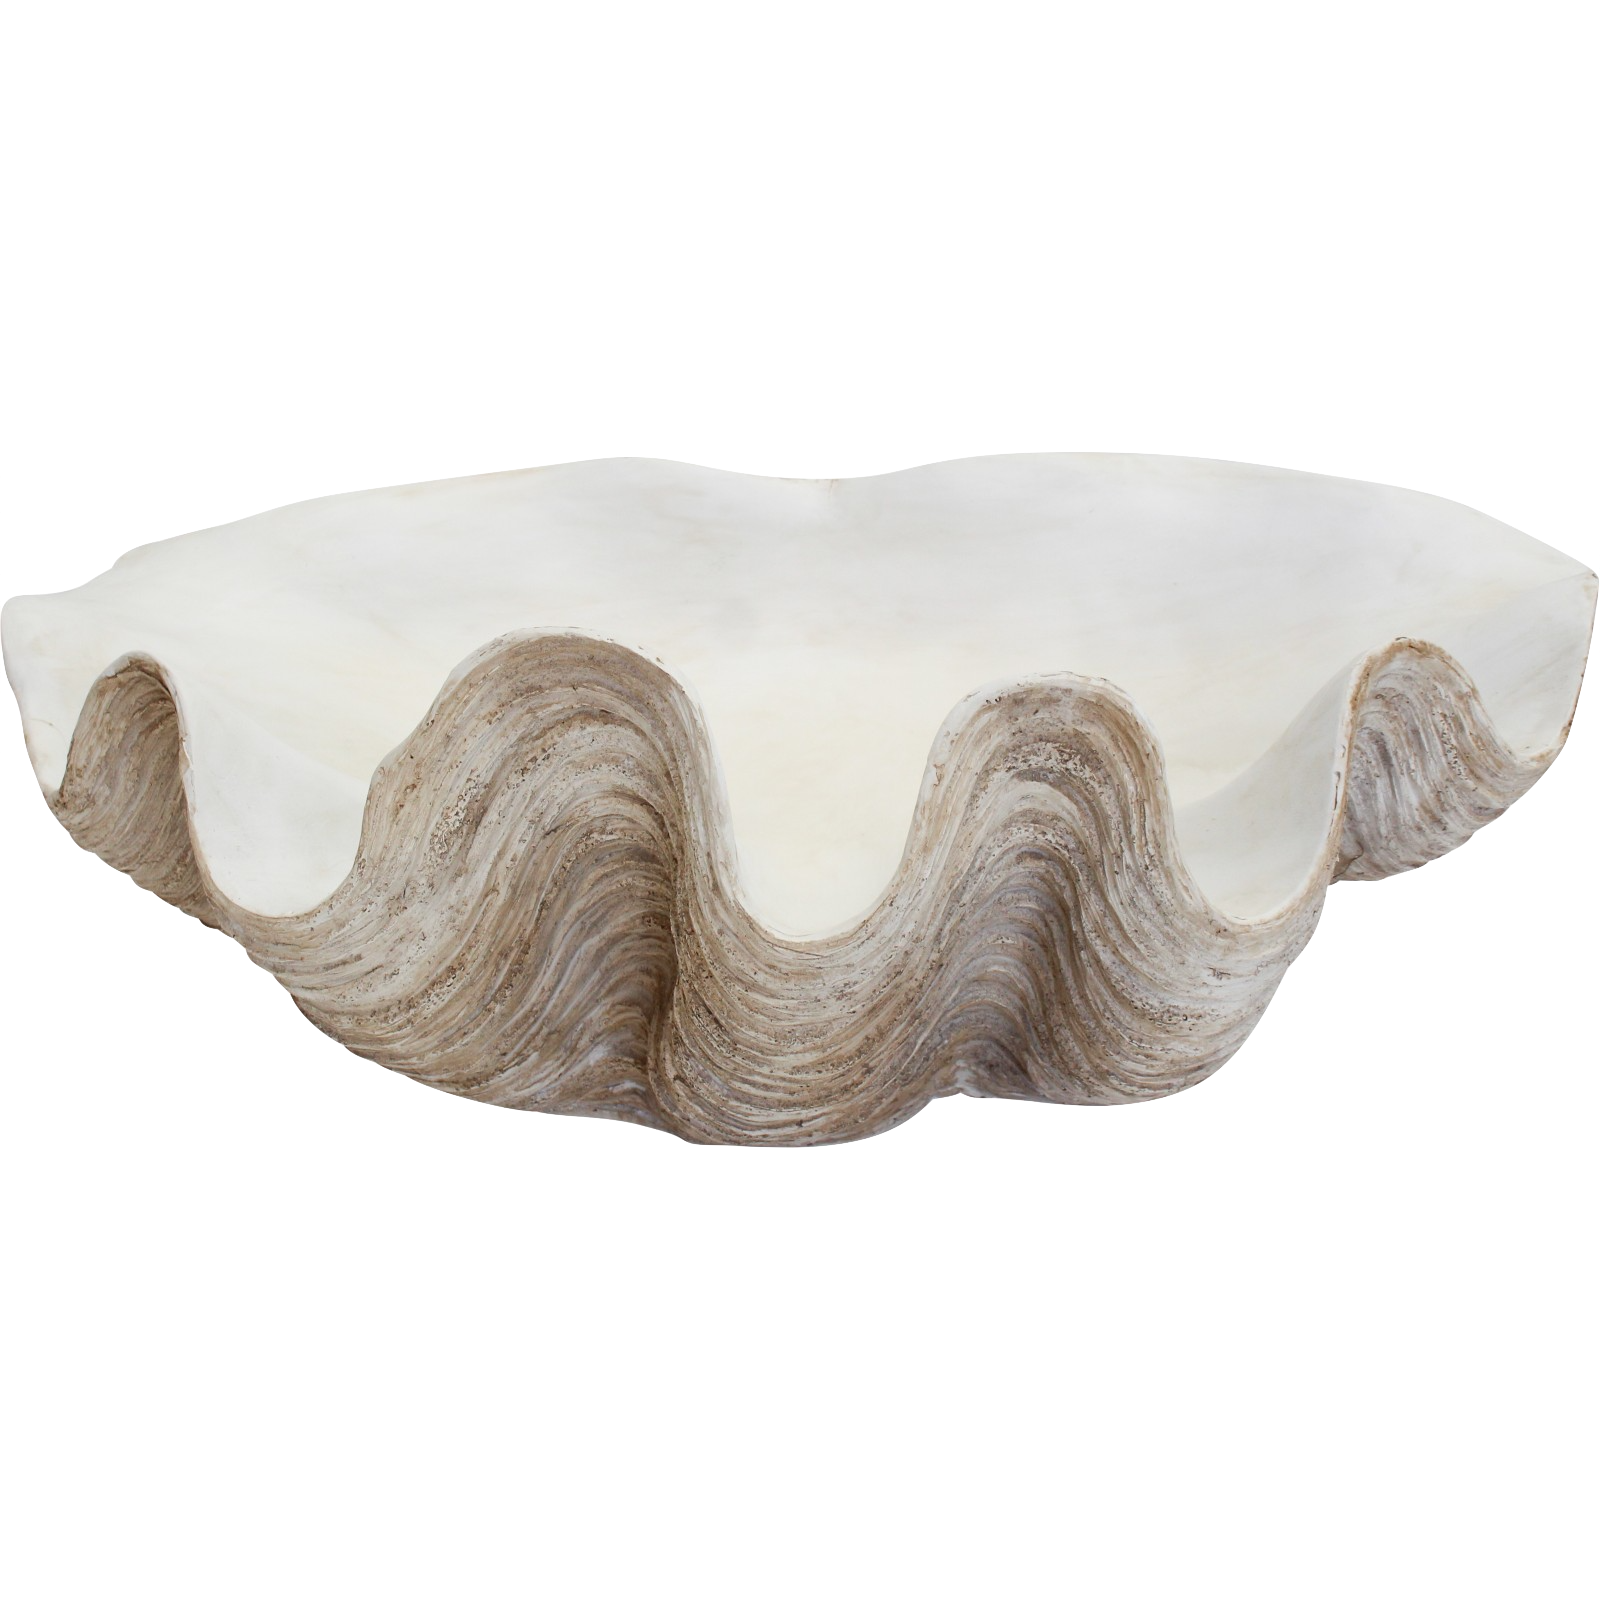 Giant Clam Shell Natural